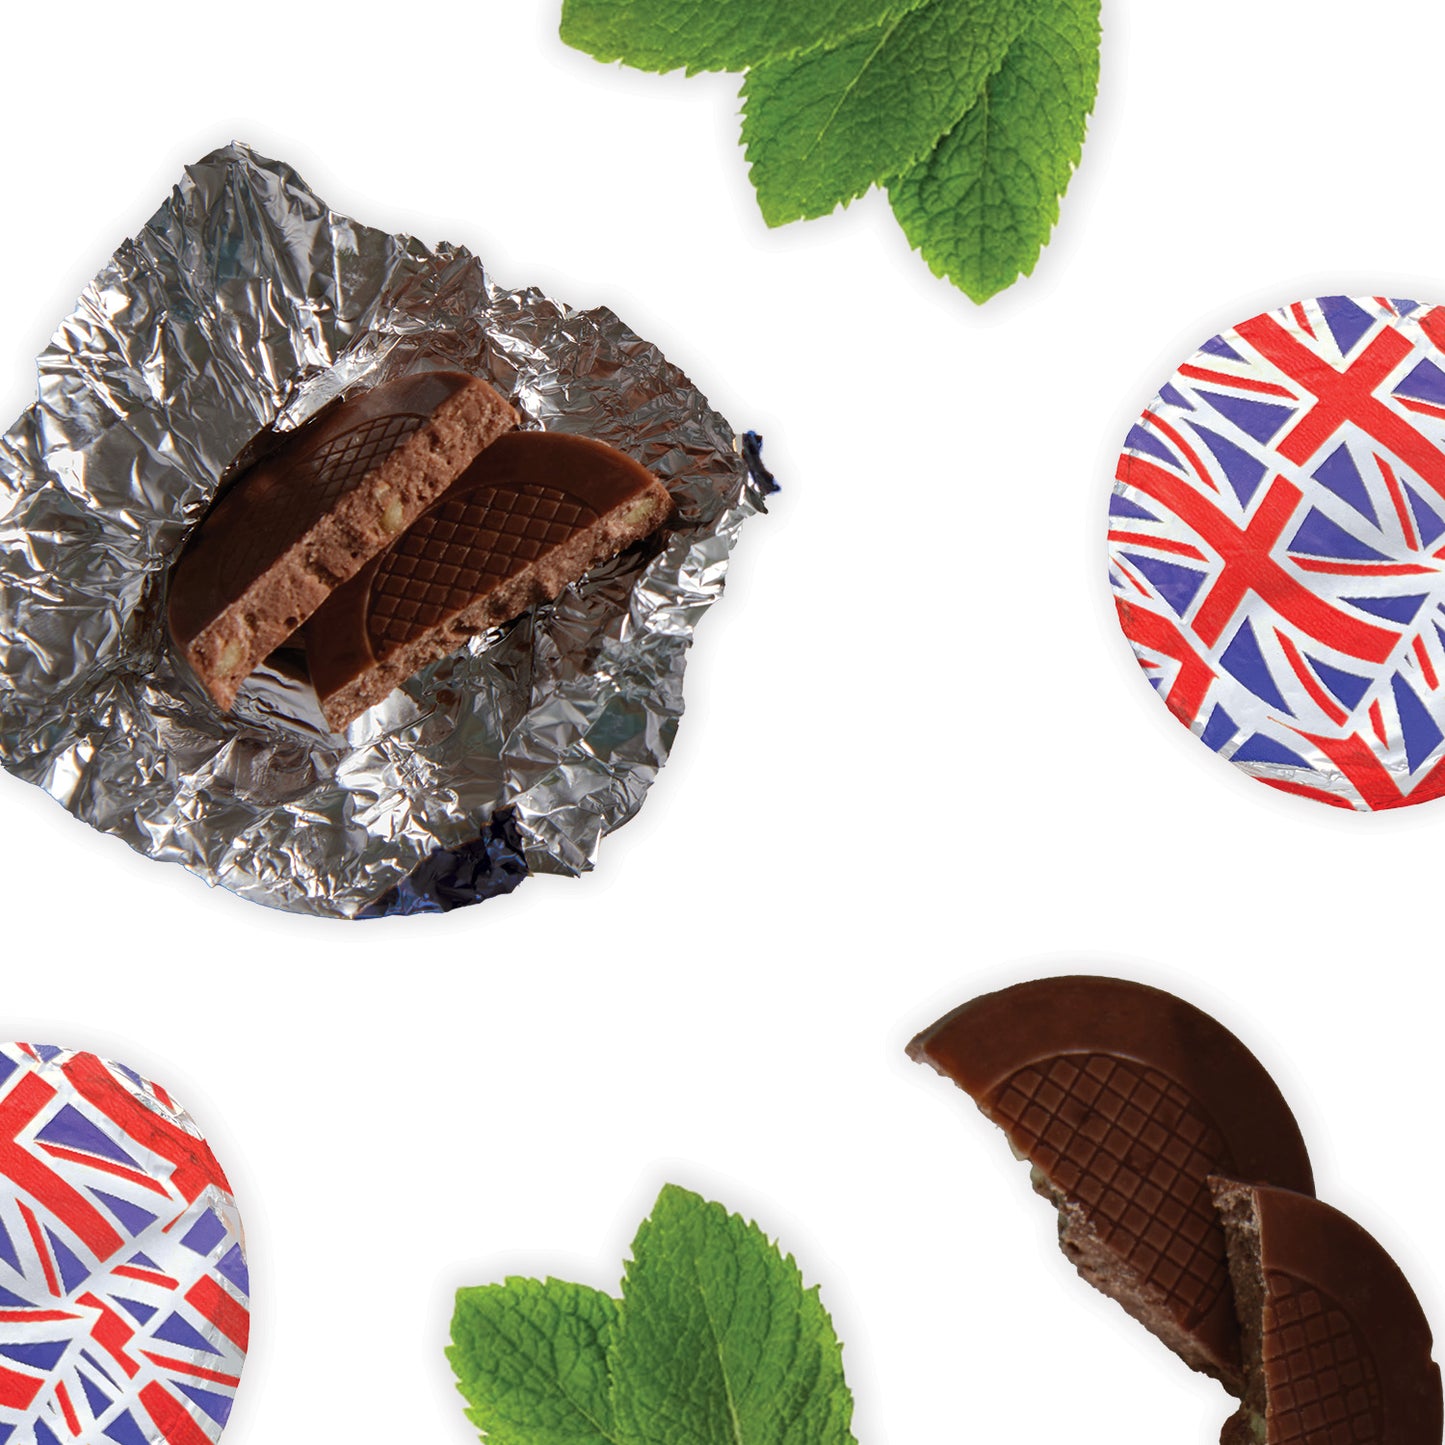 Rich Signature Dark Chocolate Crisps, masterfully blended with invigorating peppermint oil and the delightful crunch of sugar crystal pieces. Each of the approximately 155 individually wrapped chocolates is encased in distinctive Union Jack foil, reflecting a proud heritage and a commitment to quality